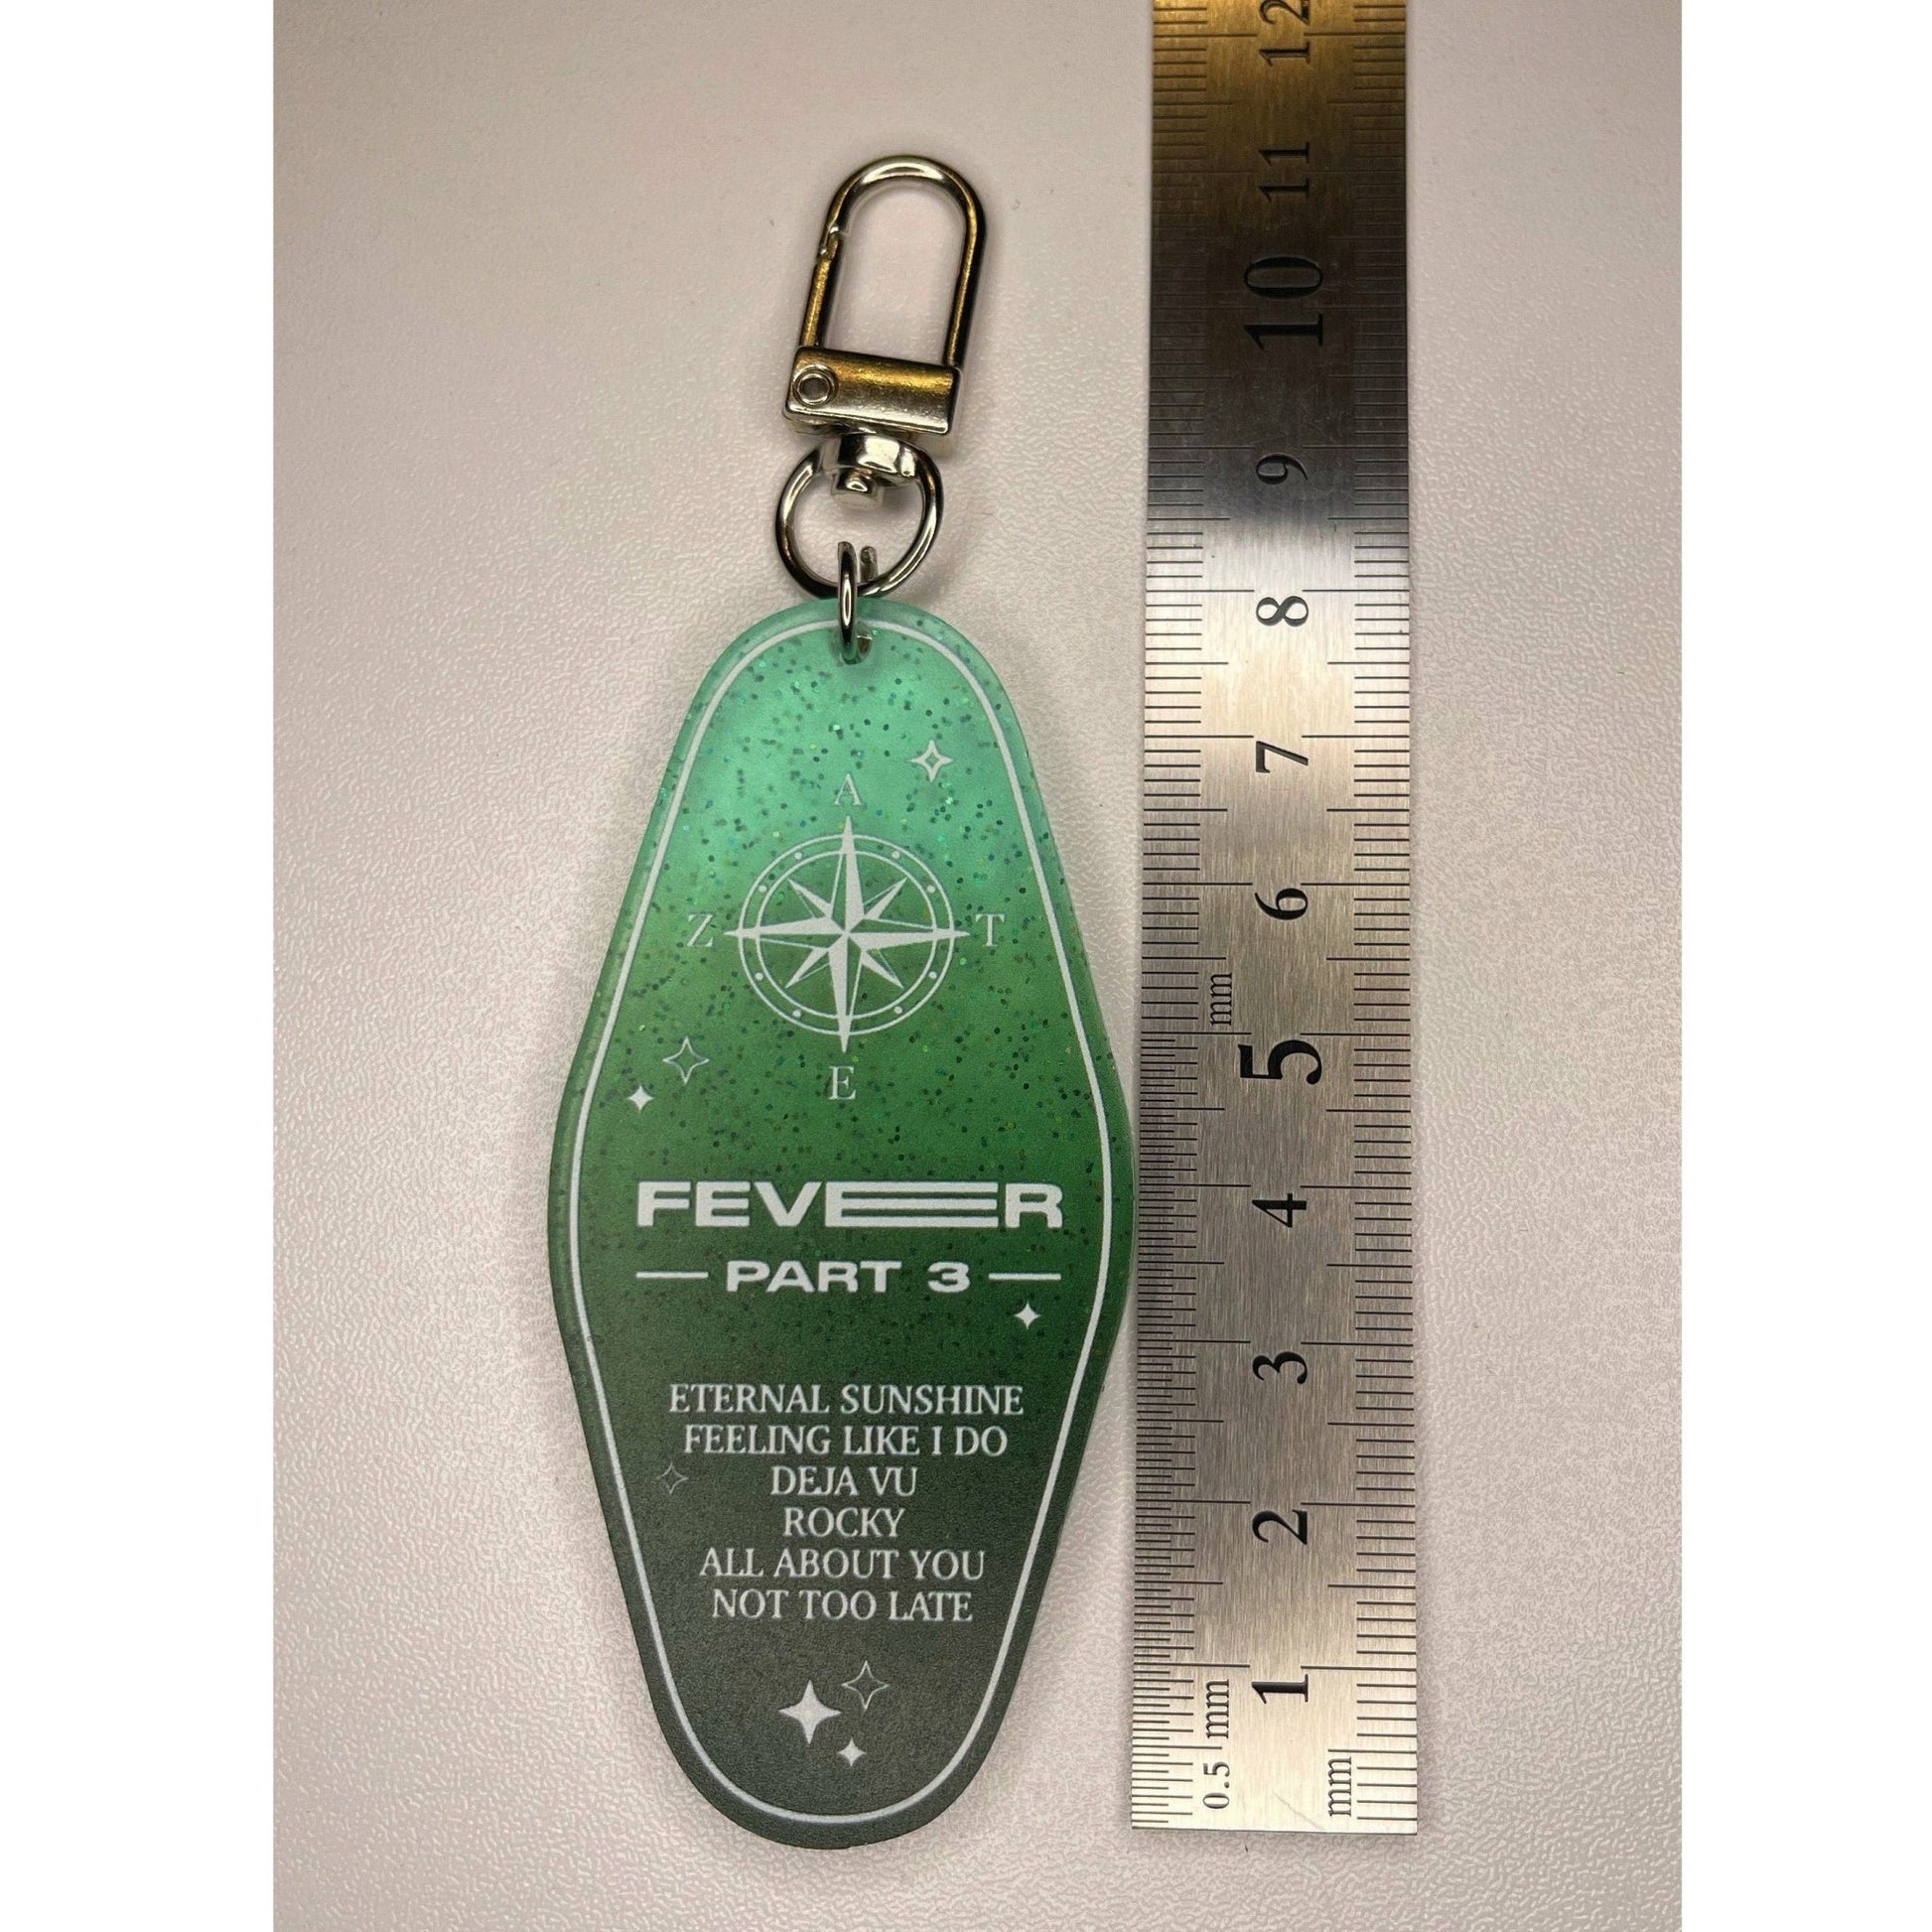 ATEEZ Fever Part 3 Keychain - MilkBunn Co. Ateez fever pt.3 keychain, A ver (green) shown next to ruler for accurate size.